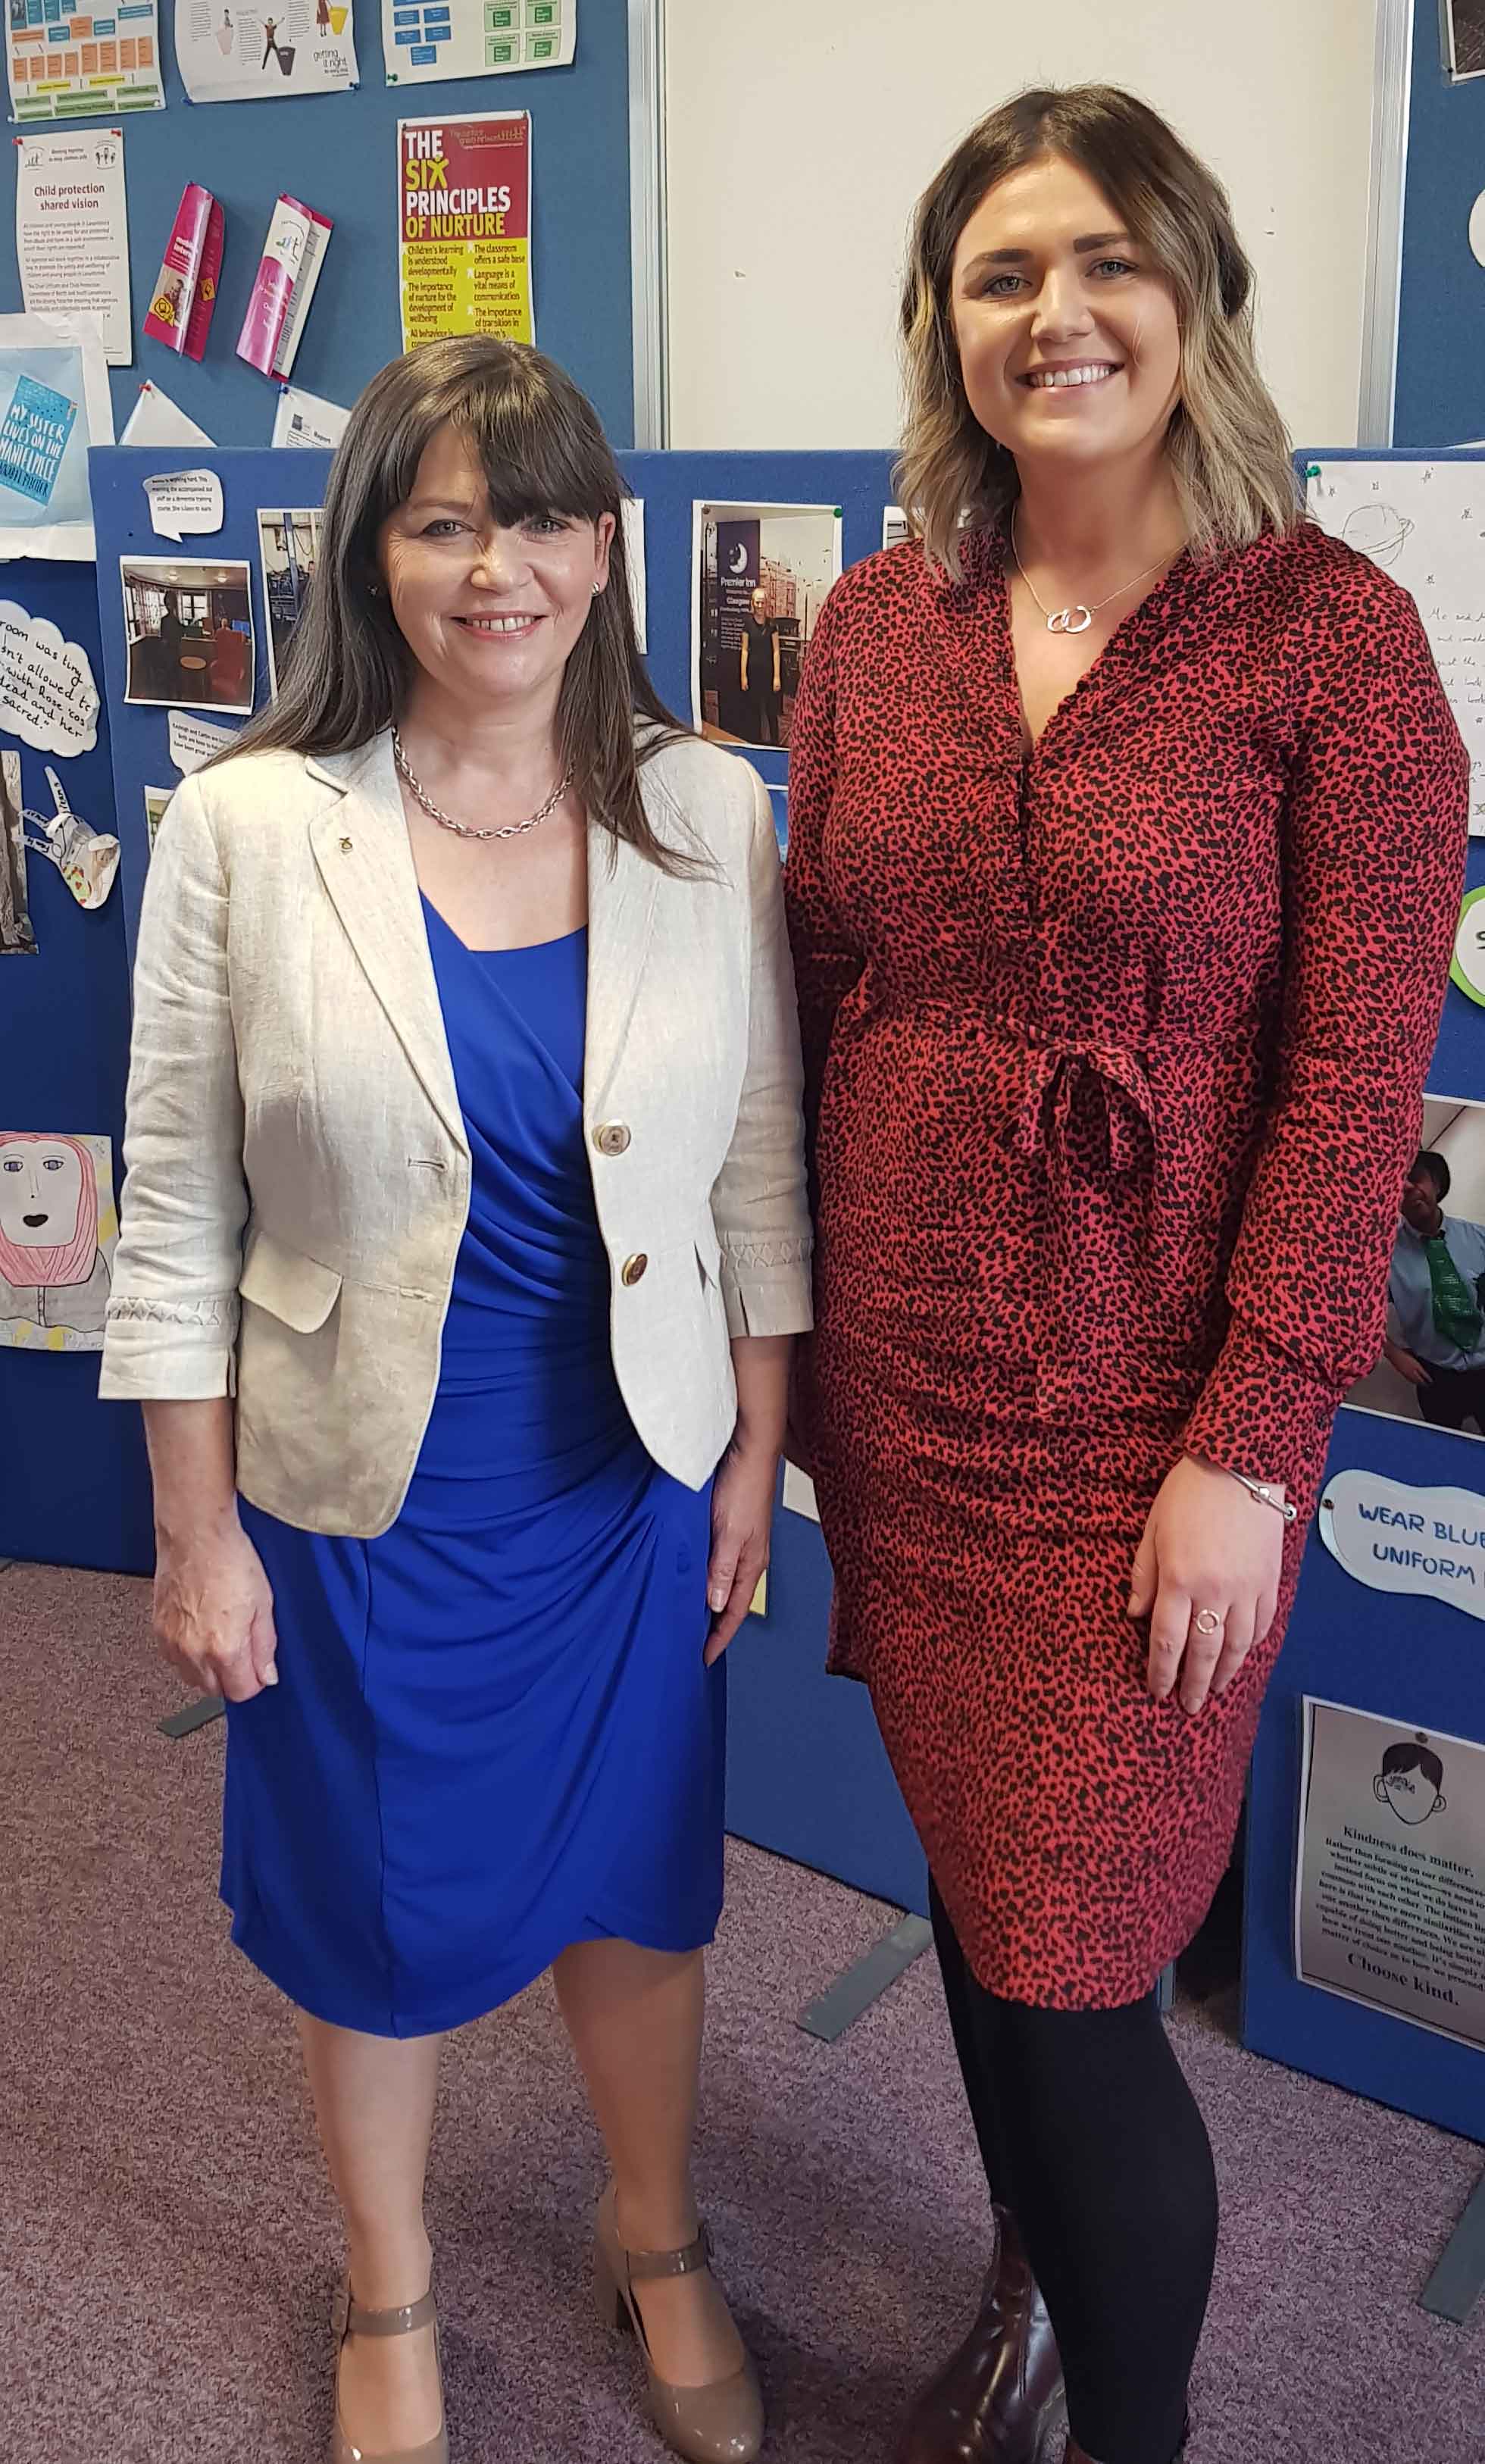 Minister for Mental Health Clare Haughey and Edinburgh Napier PhD student Nicole Walsh